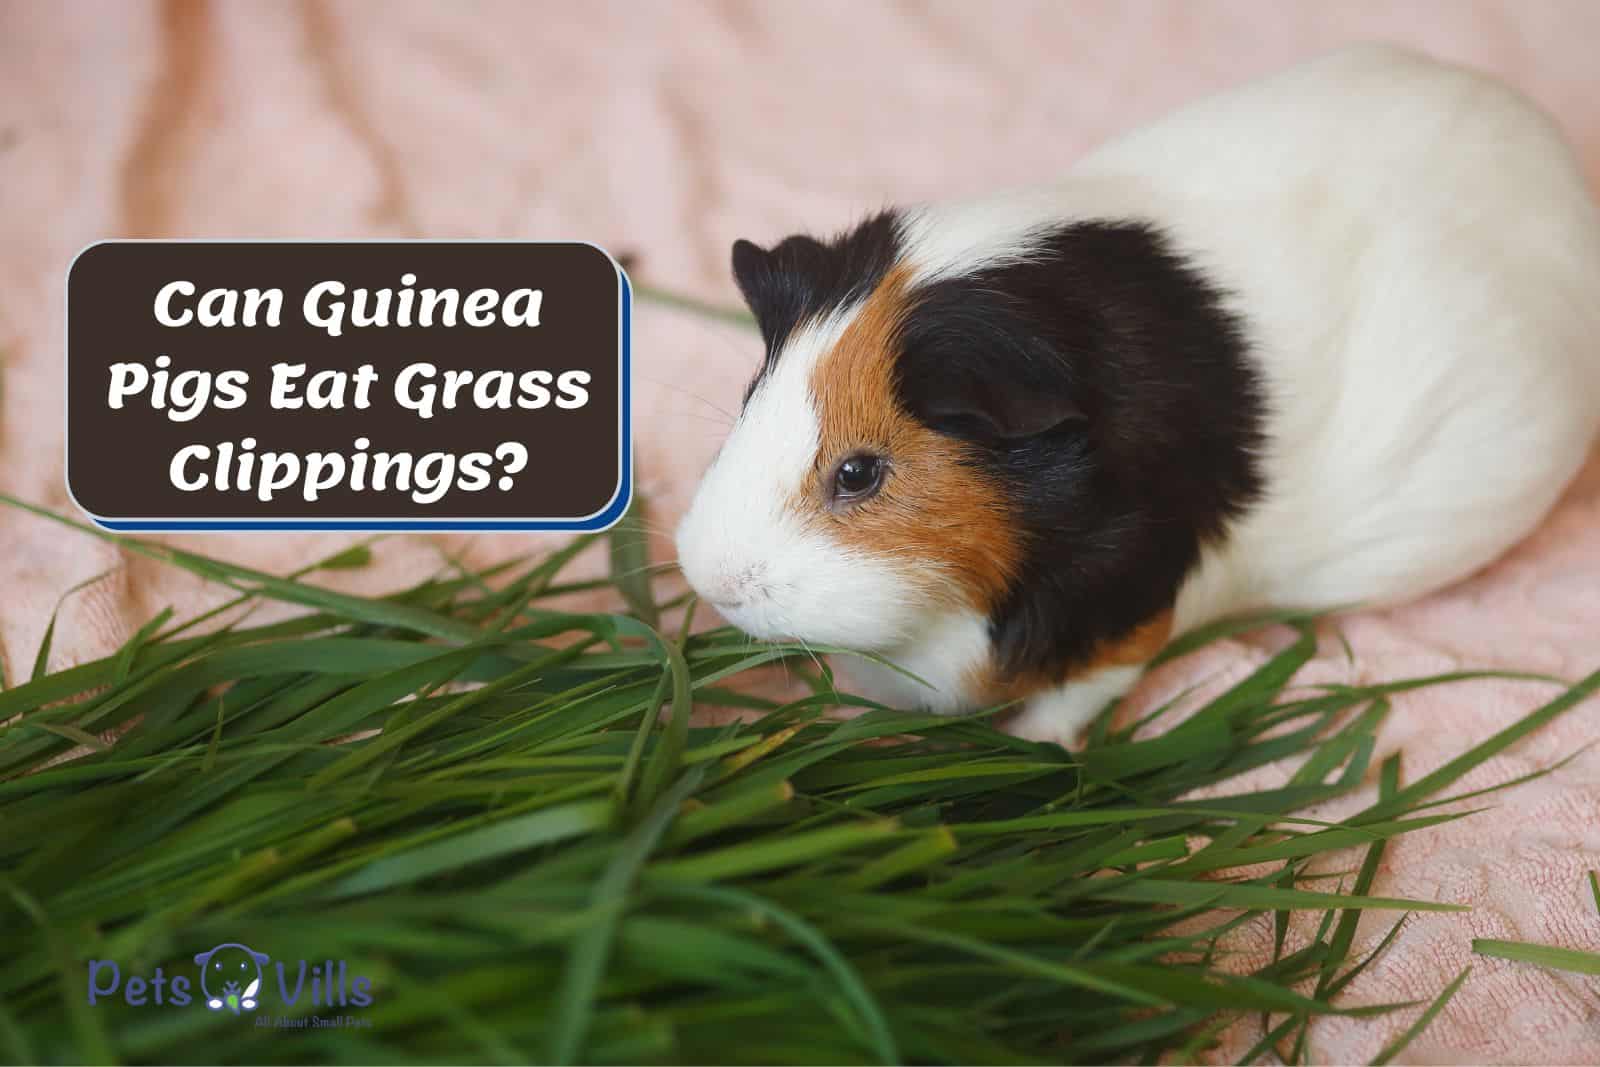 guinea pigs smelling grass clippings but can guinea pigs eat grass clippings safely?